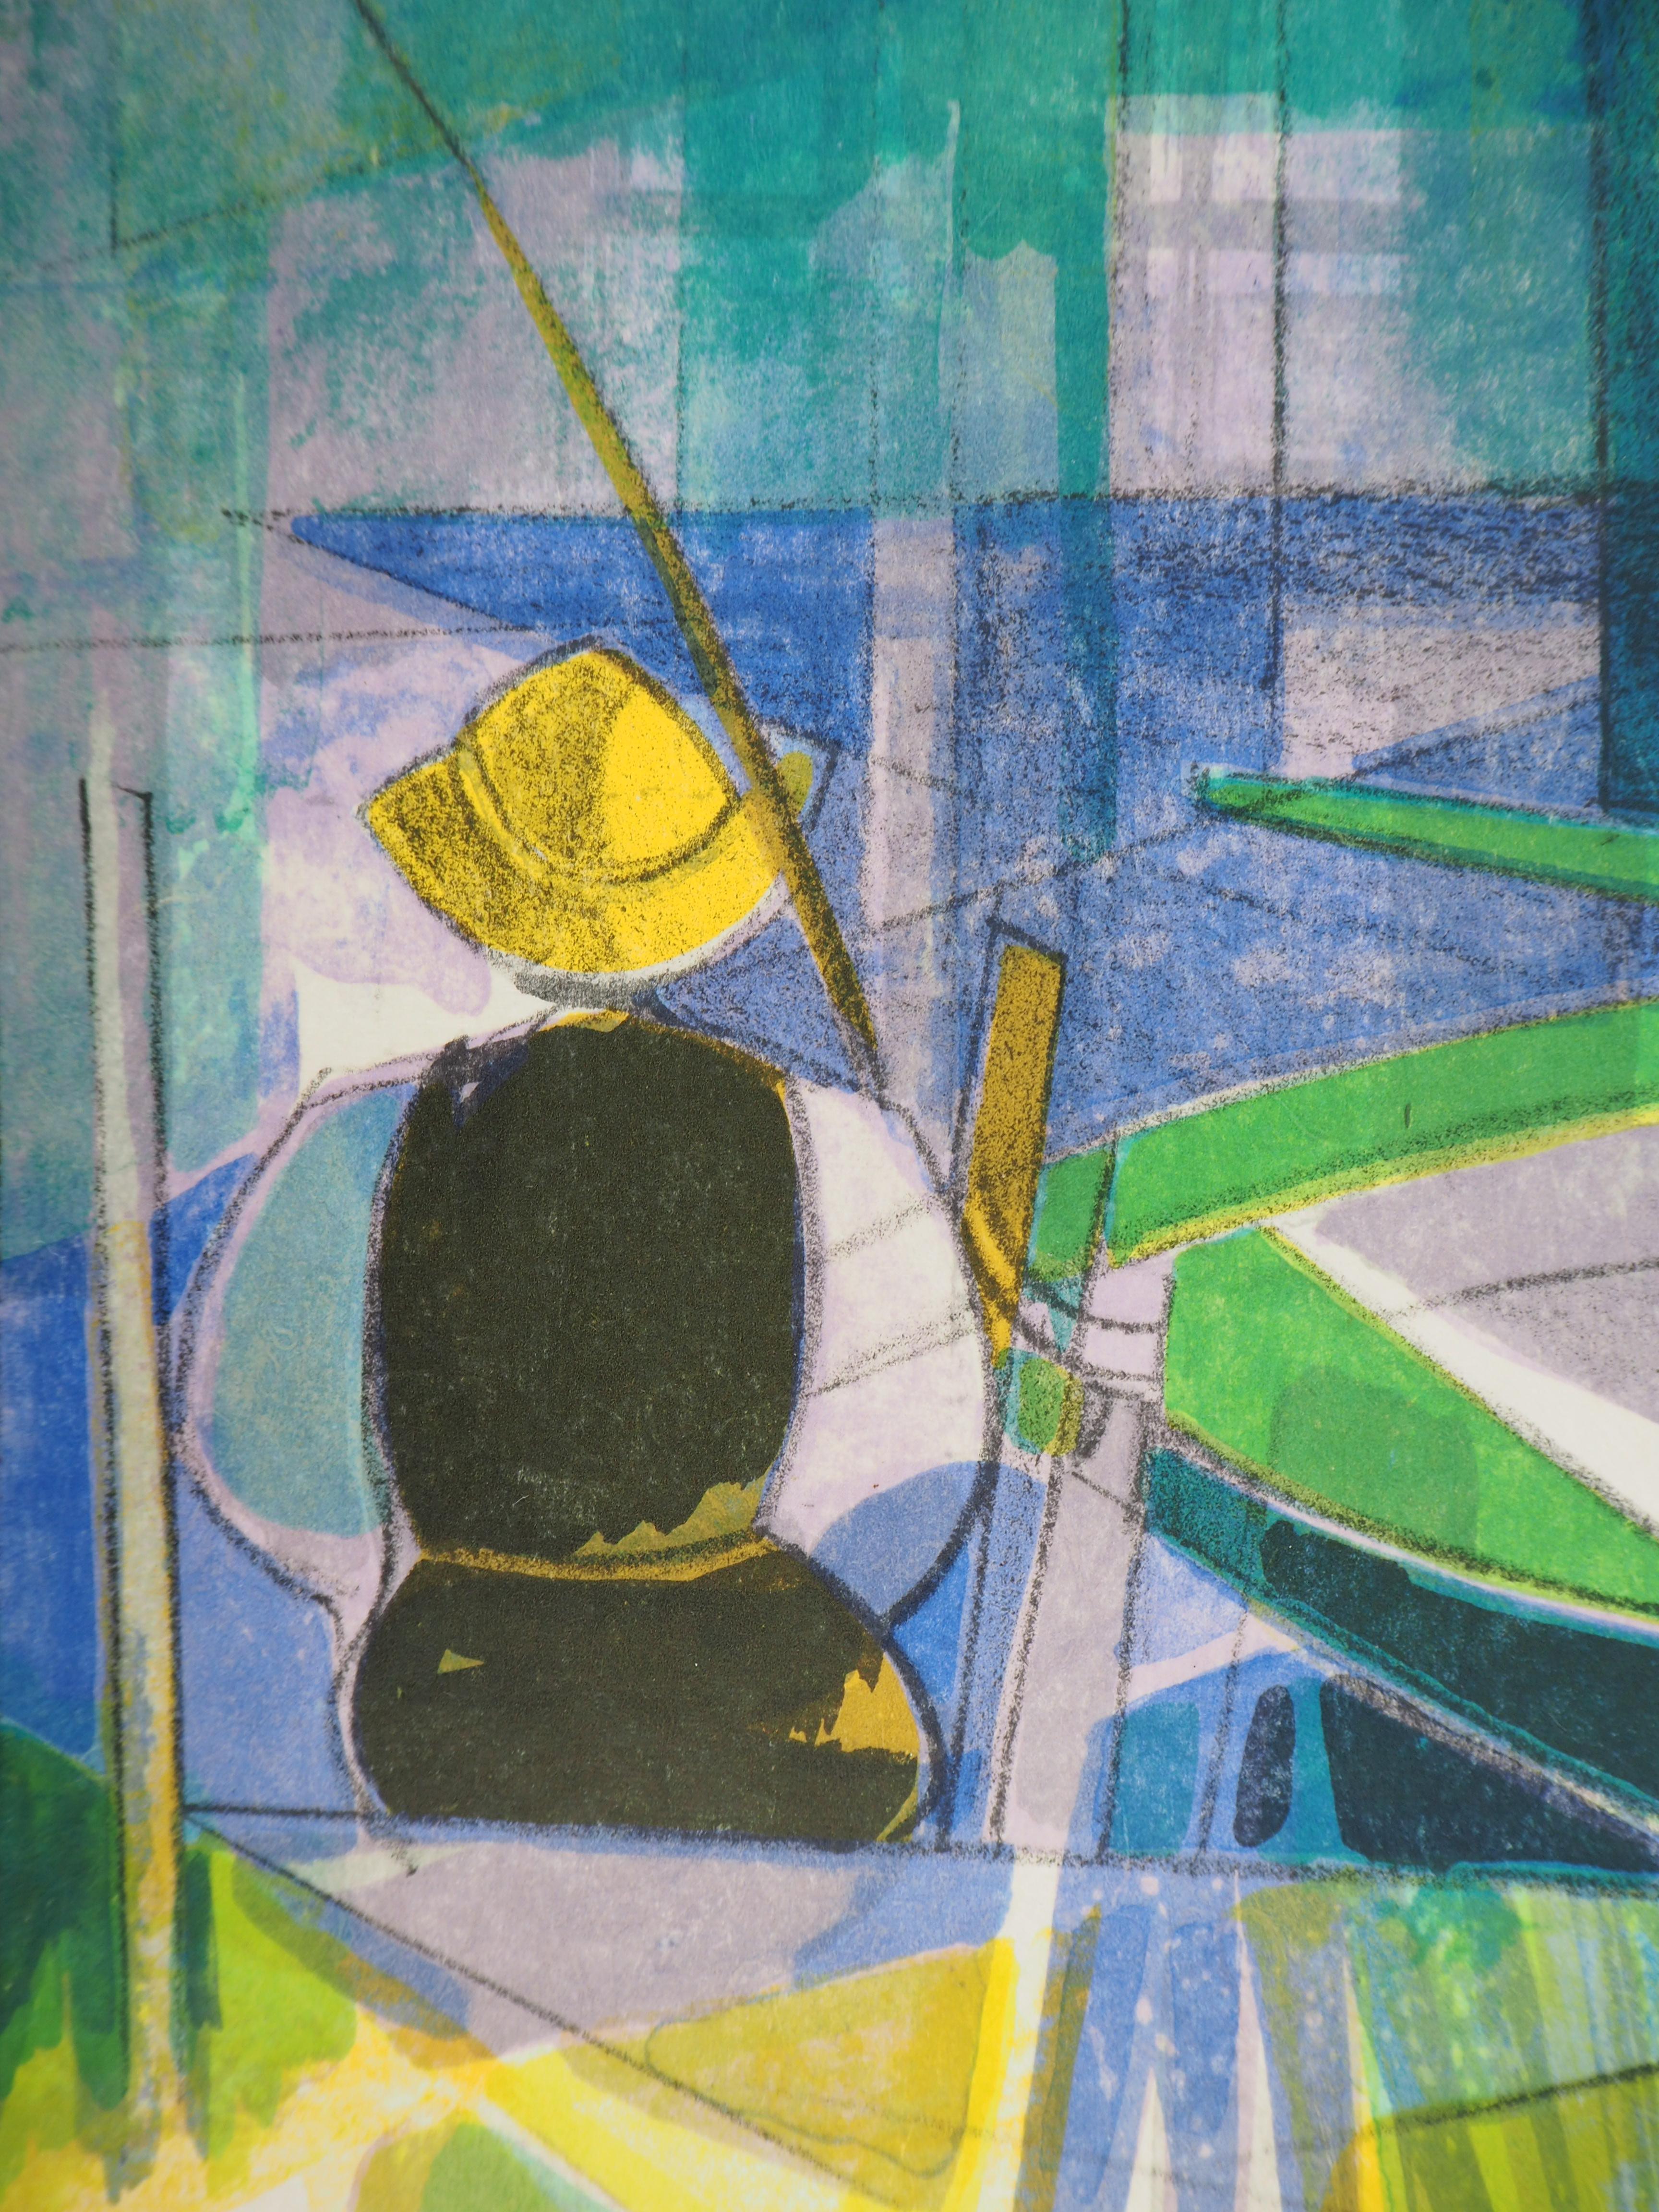 Rivers in France : The Fisherman - Original handsigned lithograph - Modern Print by Camille Hilaire